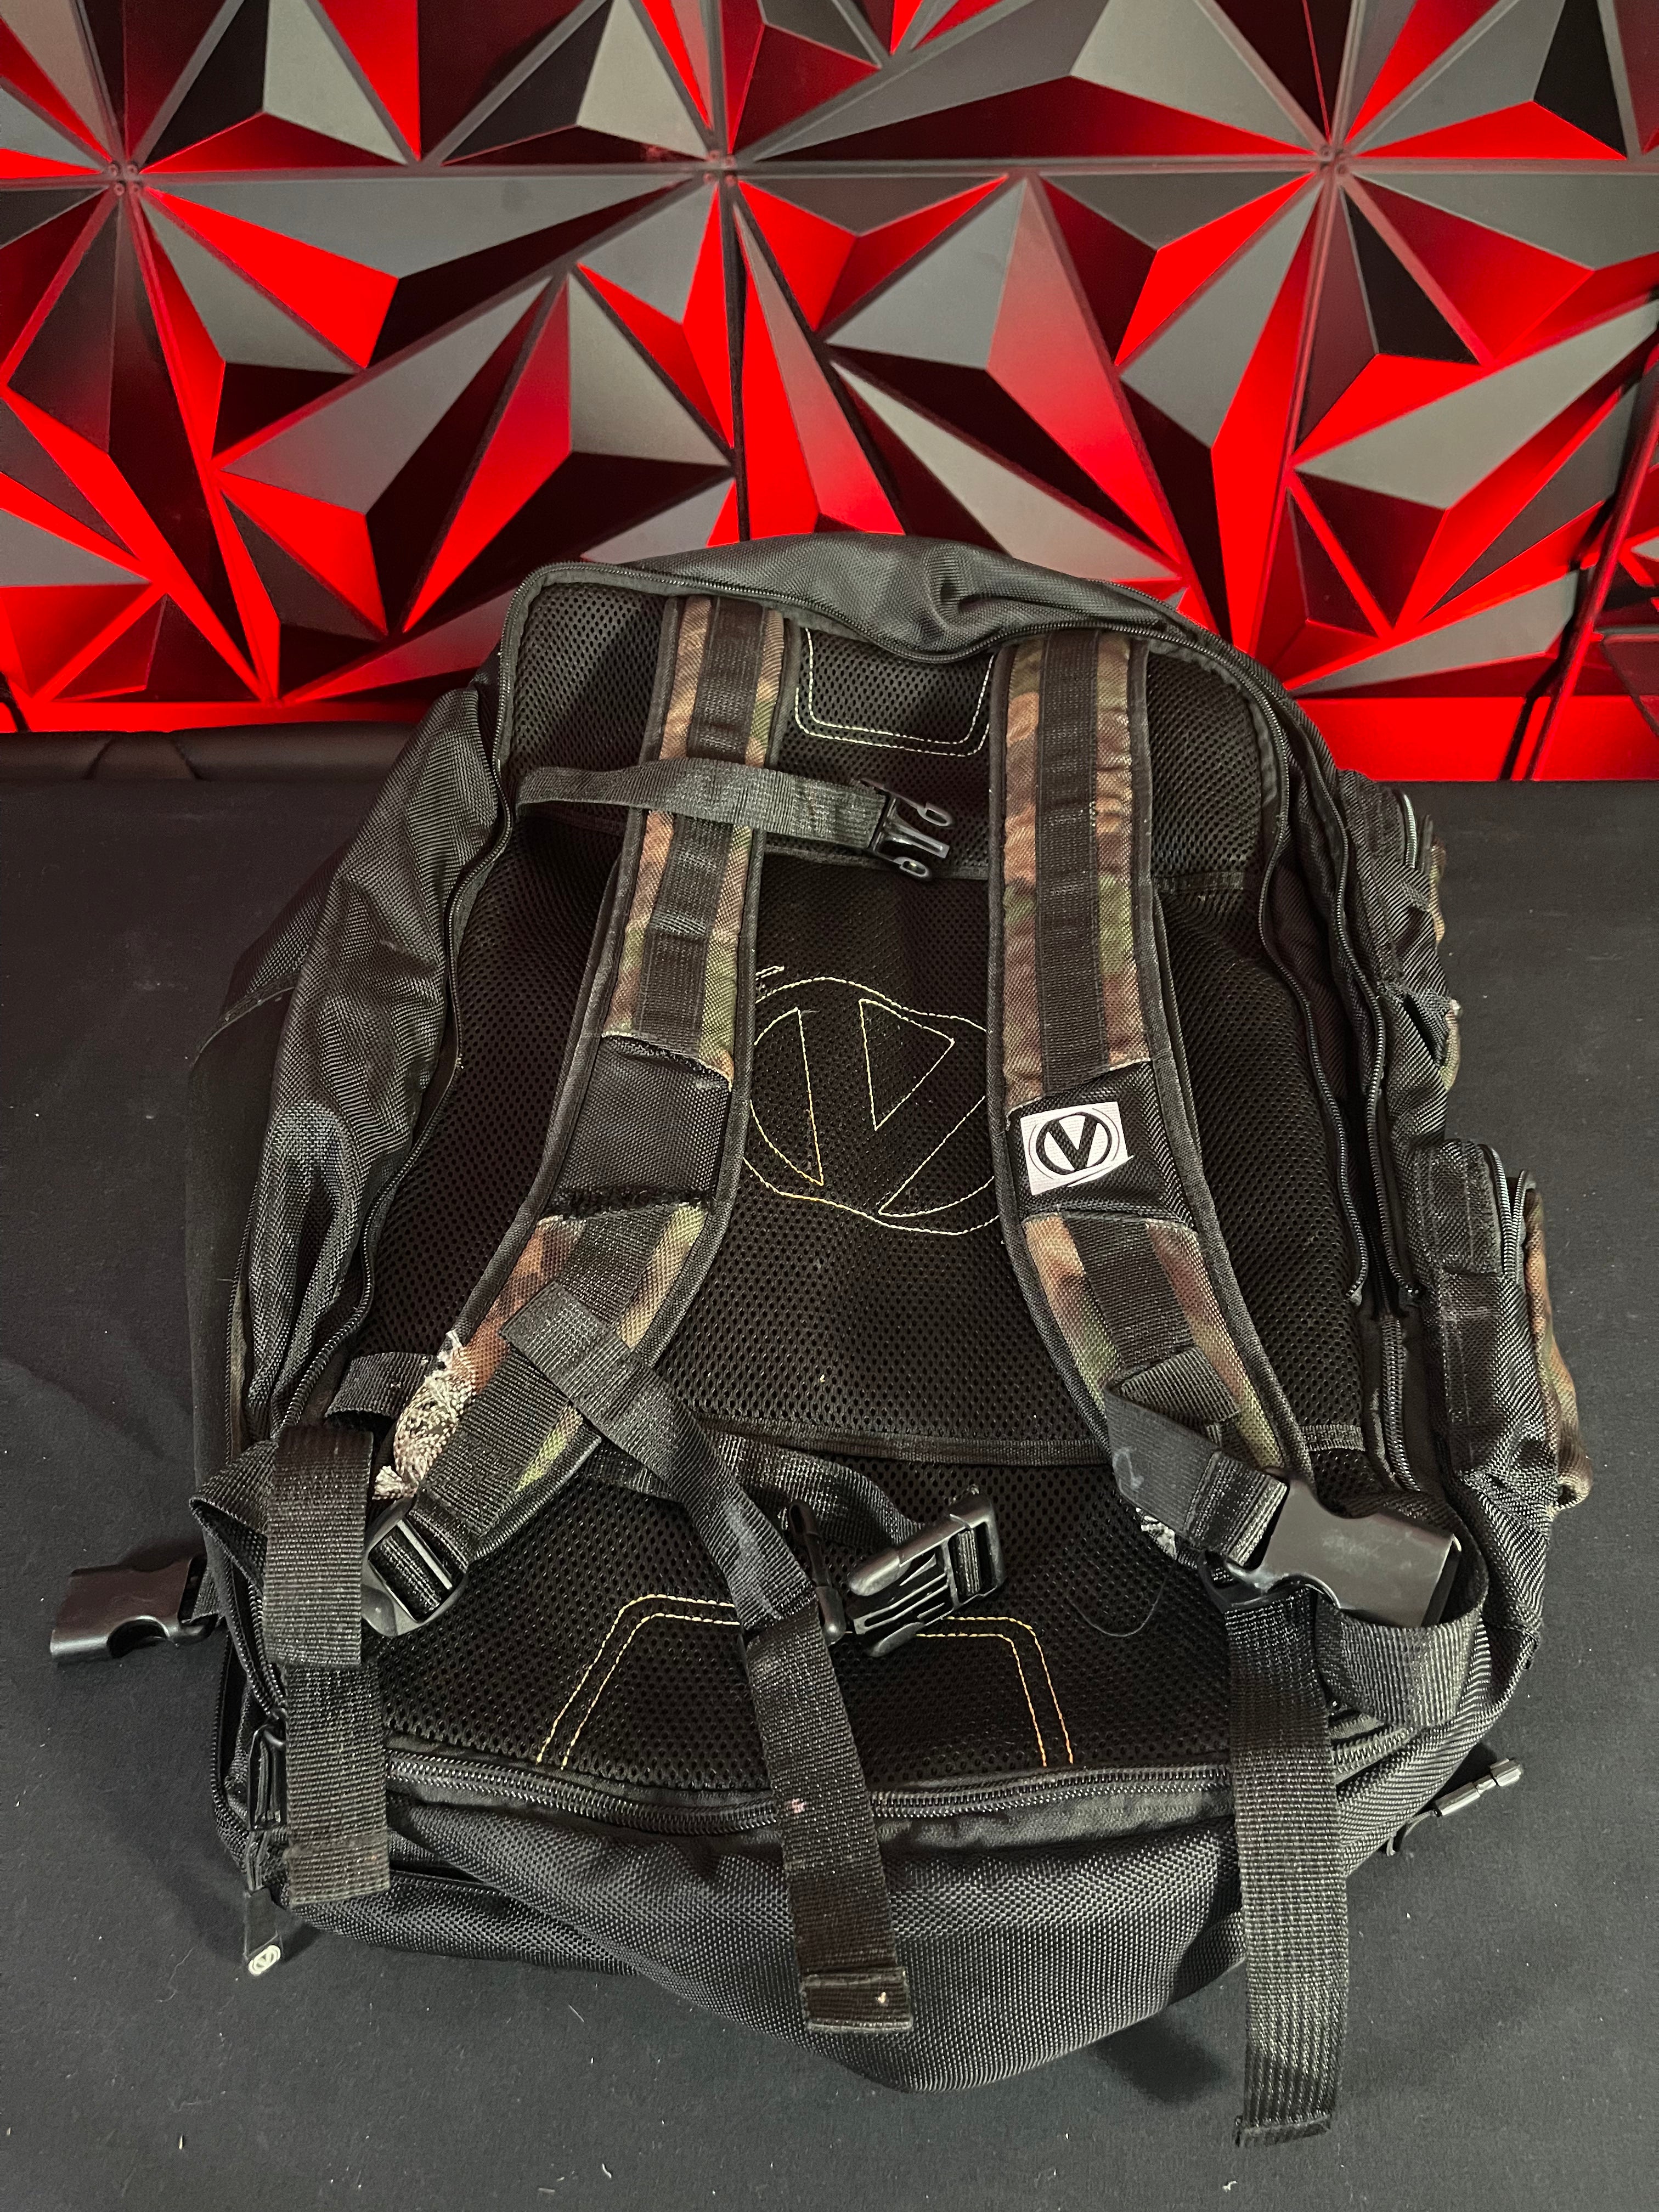 Used Virtue Gambler Backpack & Paintball Gearbag - Reality Brush Camo